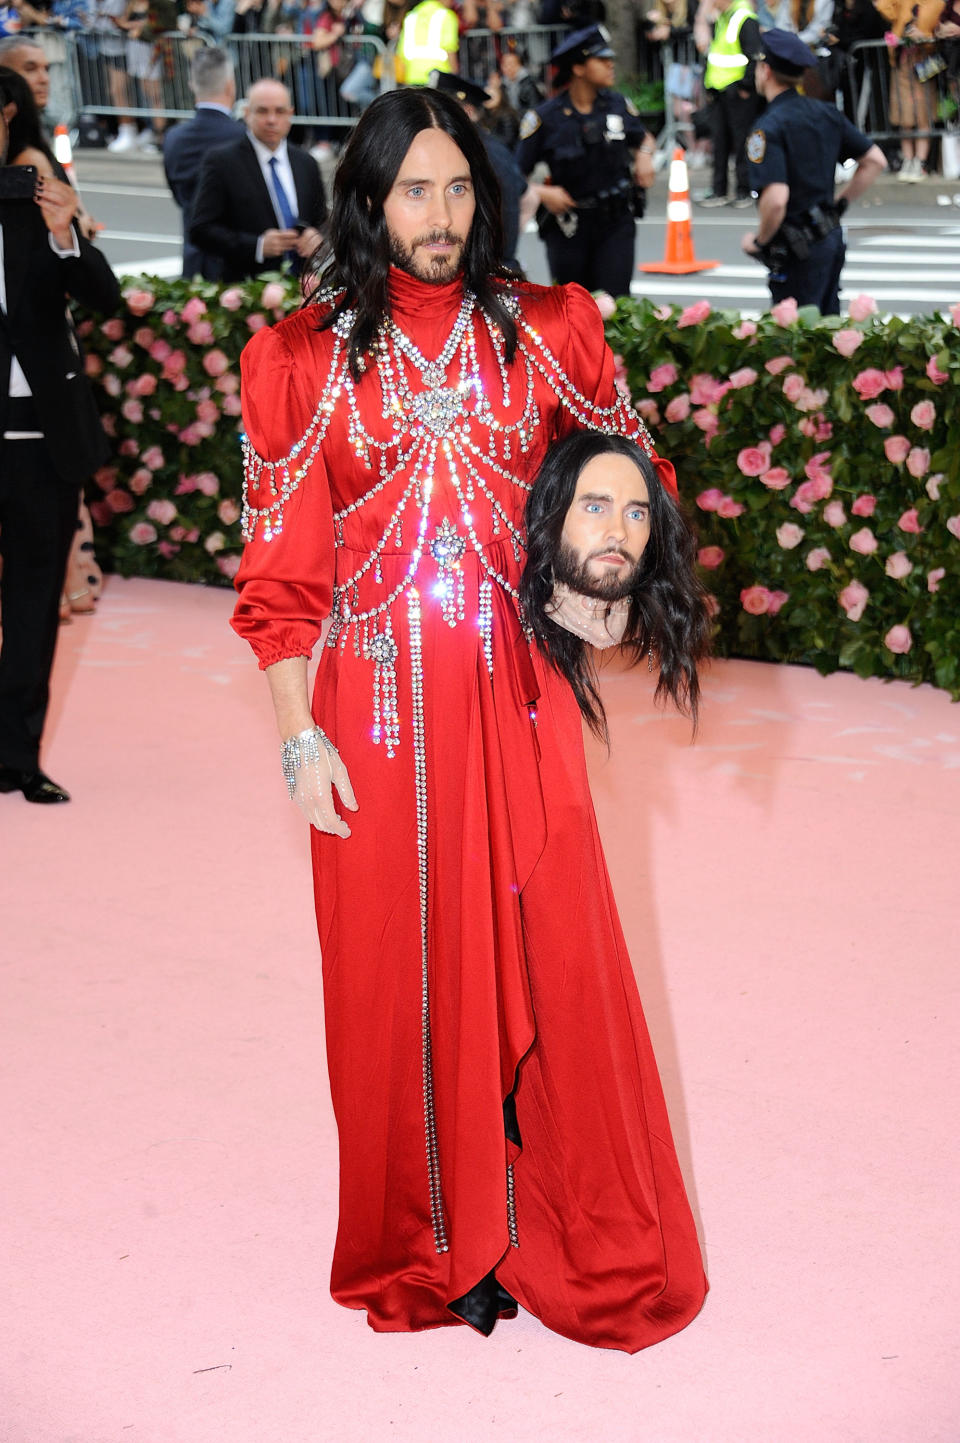 NEW YORK, NY - MAY 06:  Jared Leto attends The 2019 Met Gala Celebrating Camp: Notes On Fashion - Arrivalsat The Metropolitan Museum of Art on May 6, 2019 in New York City.  (Photo by Rabbani and Solimene Photography/WireImage)